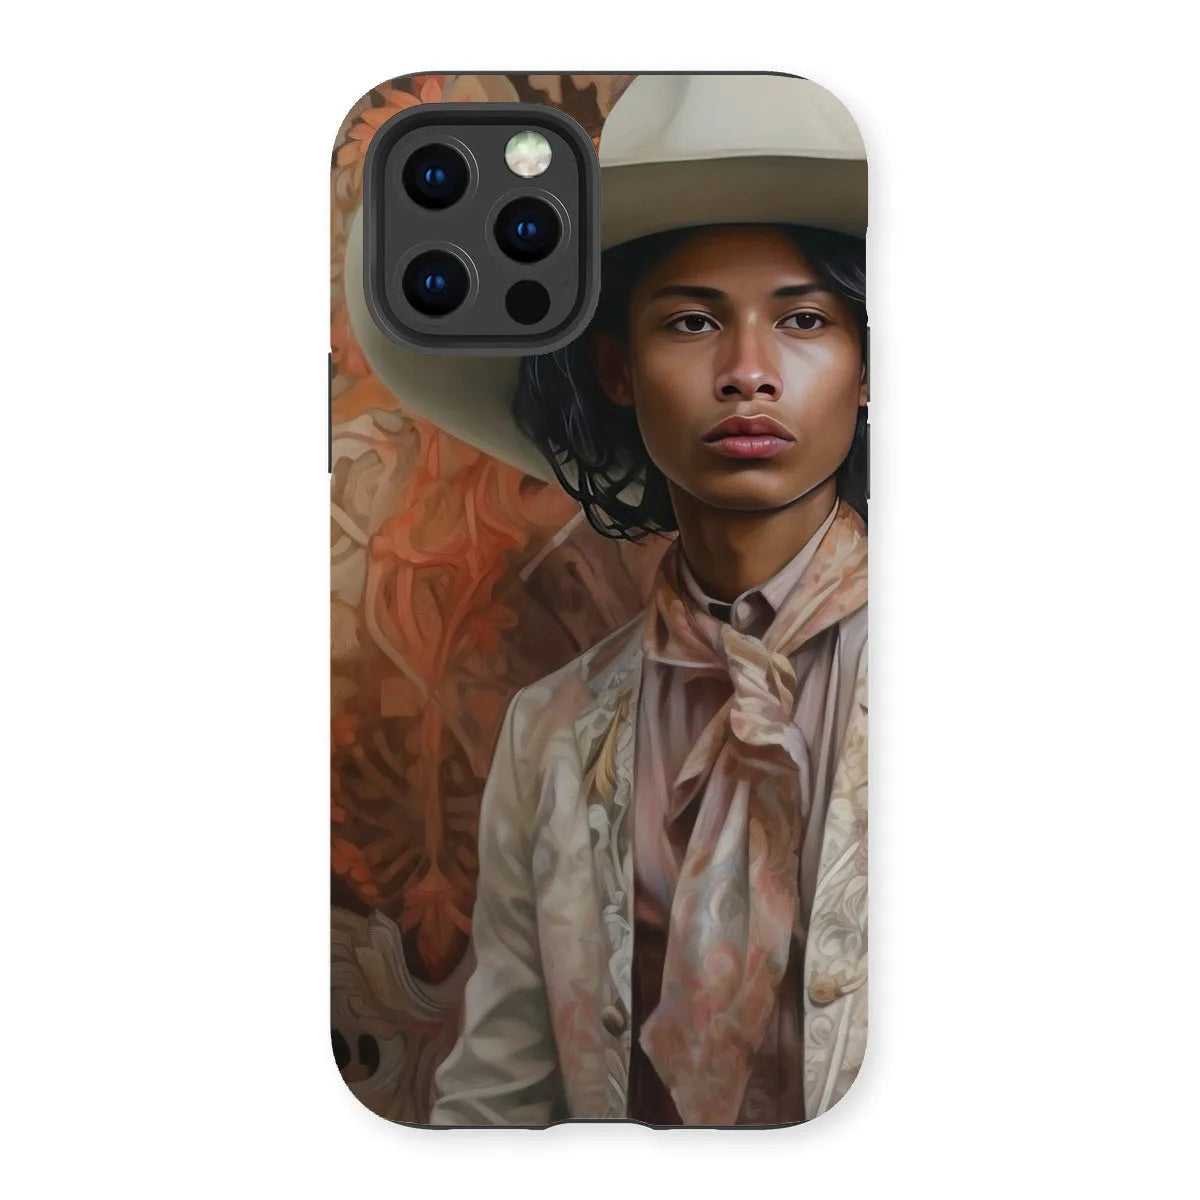 Arjuna The Gay Cowboy - Gay Aesthetic Art Phone Case - Iphone 13 Pro / Matte - Mobile Phone Cases - Aesthetic Art